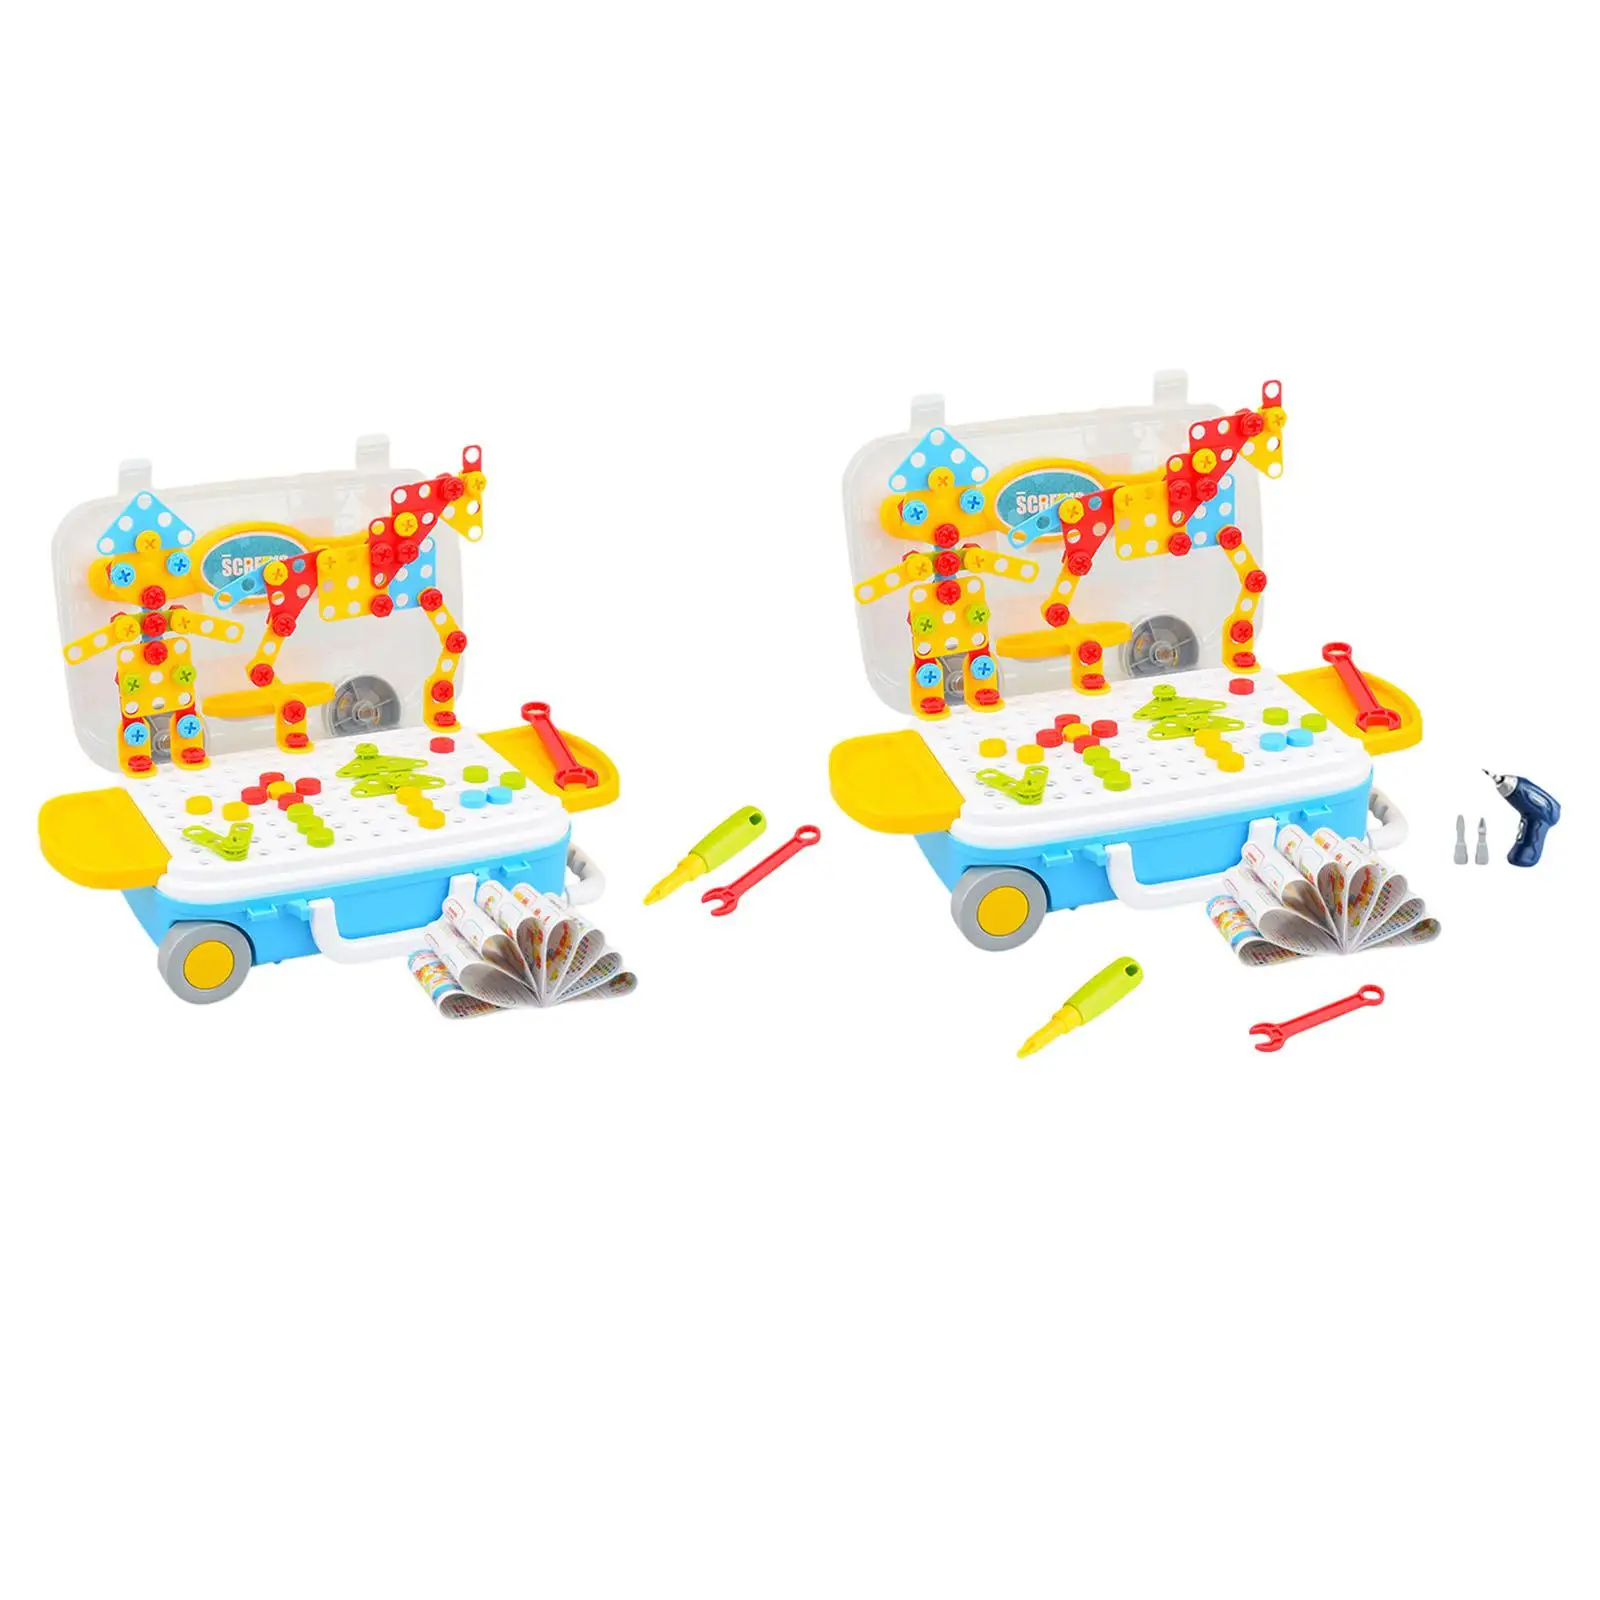 Mosaic Drill Set Nut Puzzles Block Kids Nut and Bolts Toy for Preschool Fine